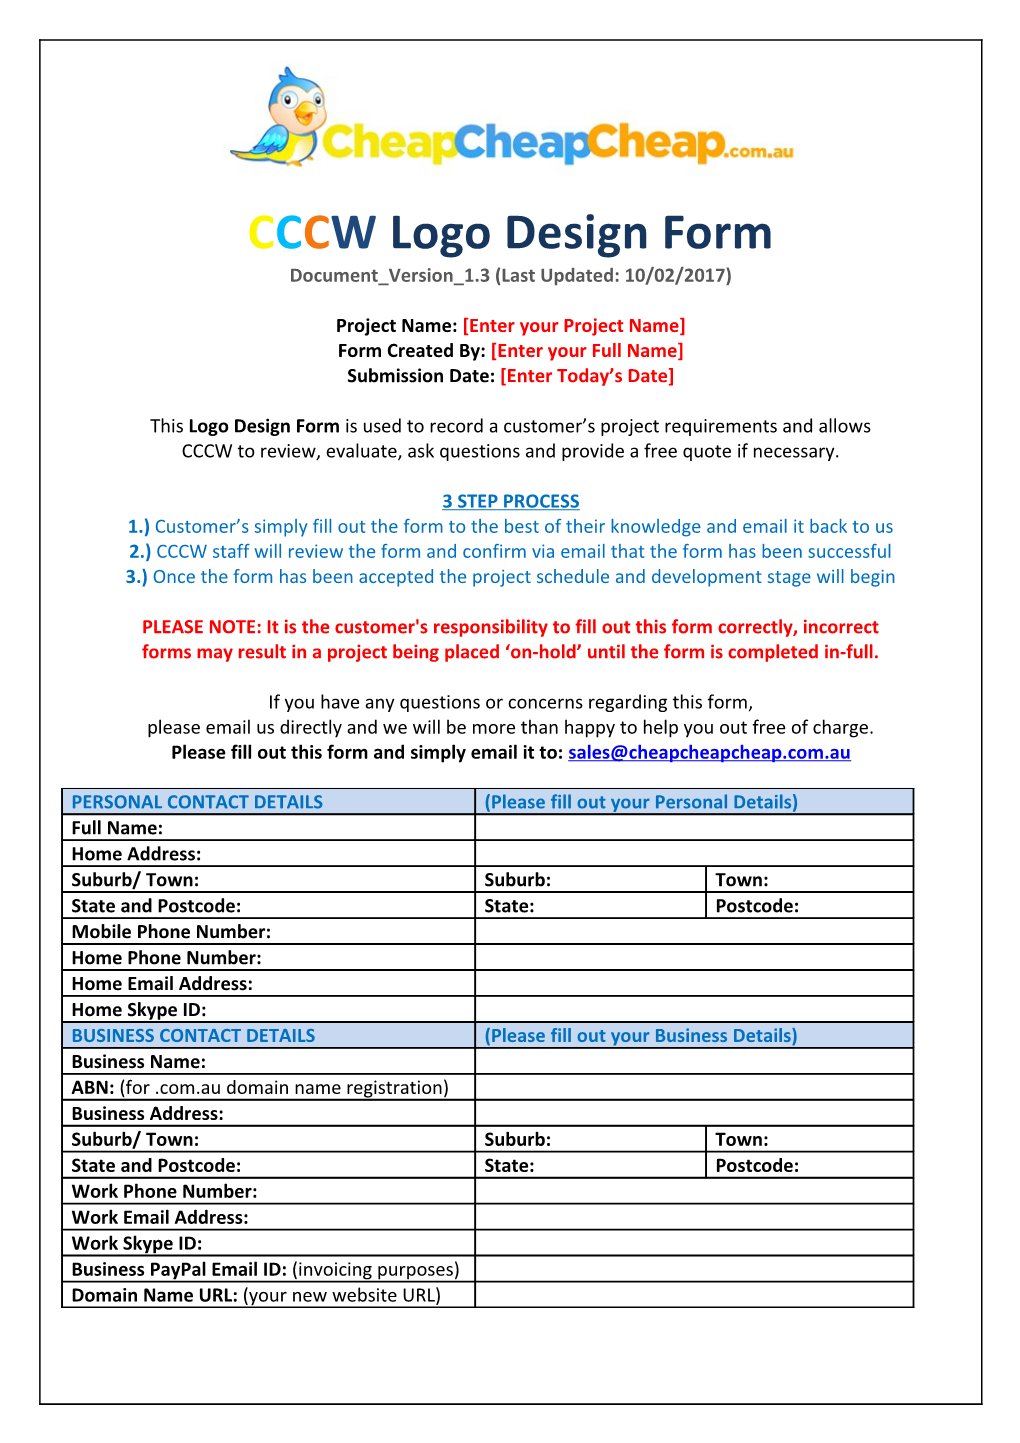 CCCW Logo Design Form Document Version 1.3 (Last Updated: 10/02/2017) Project Name: Enter